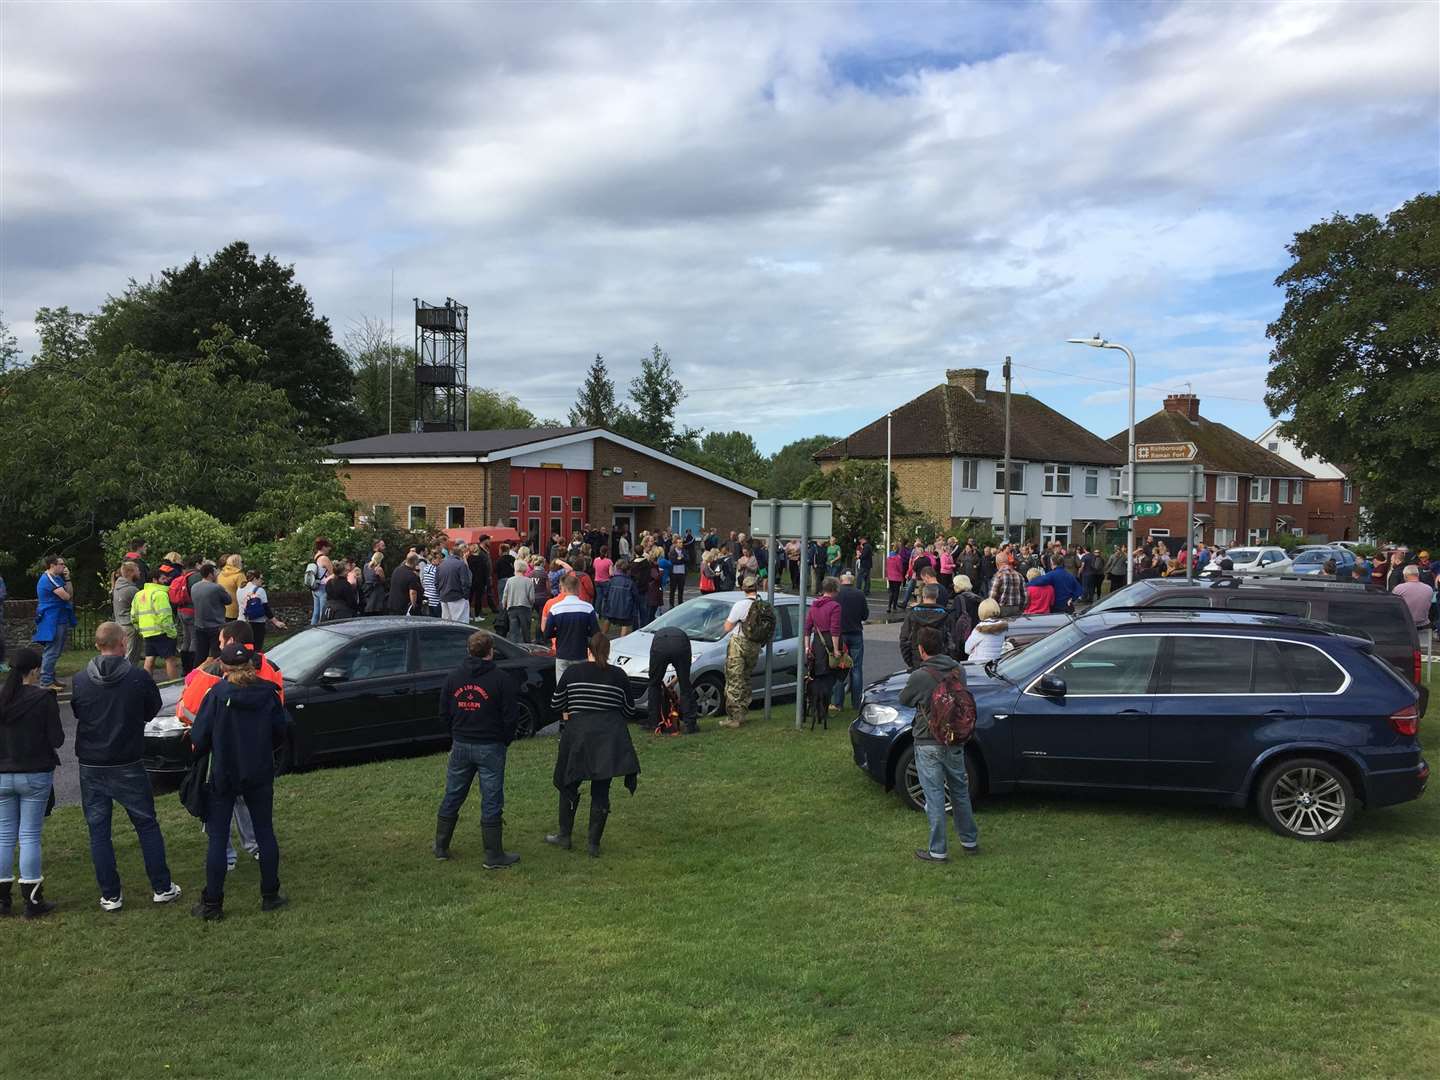 Crowds gather outside the fire station